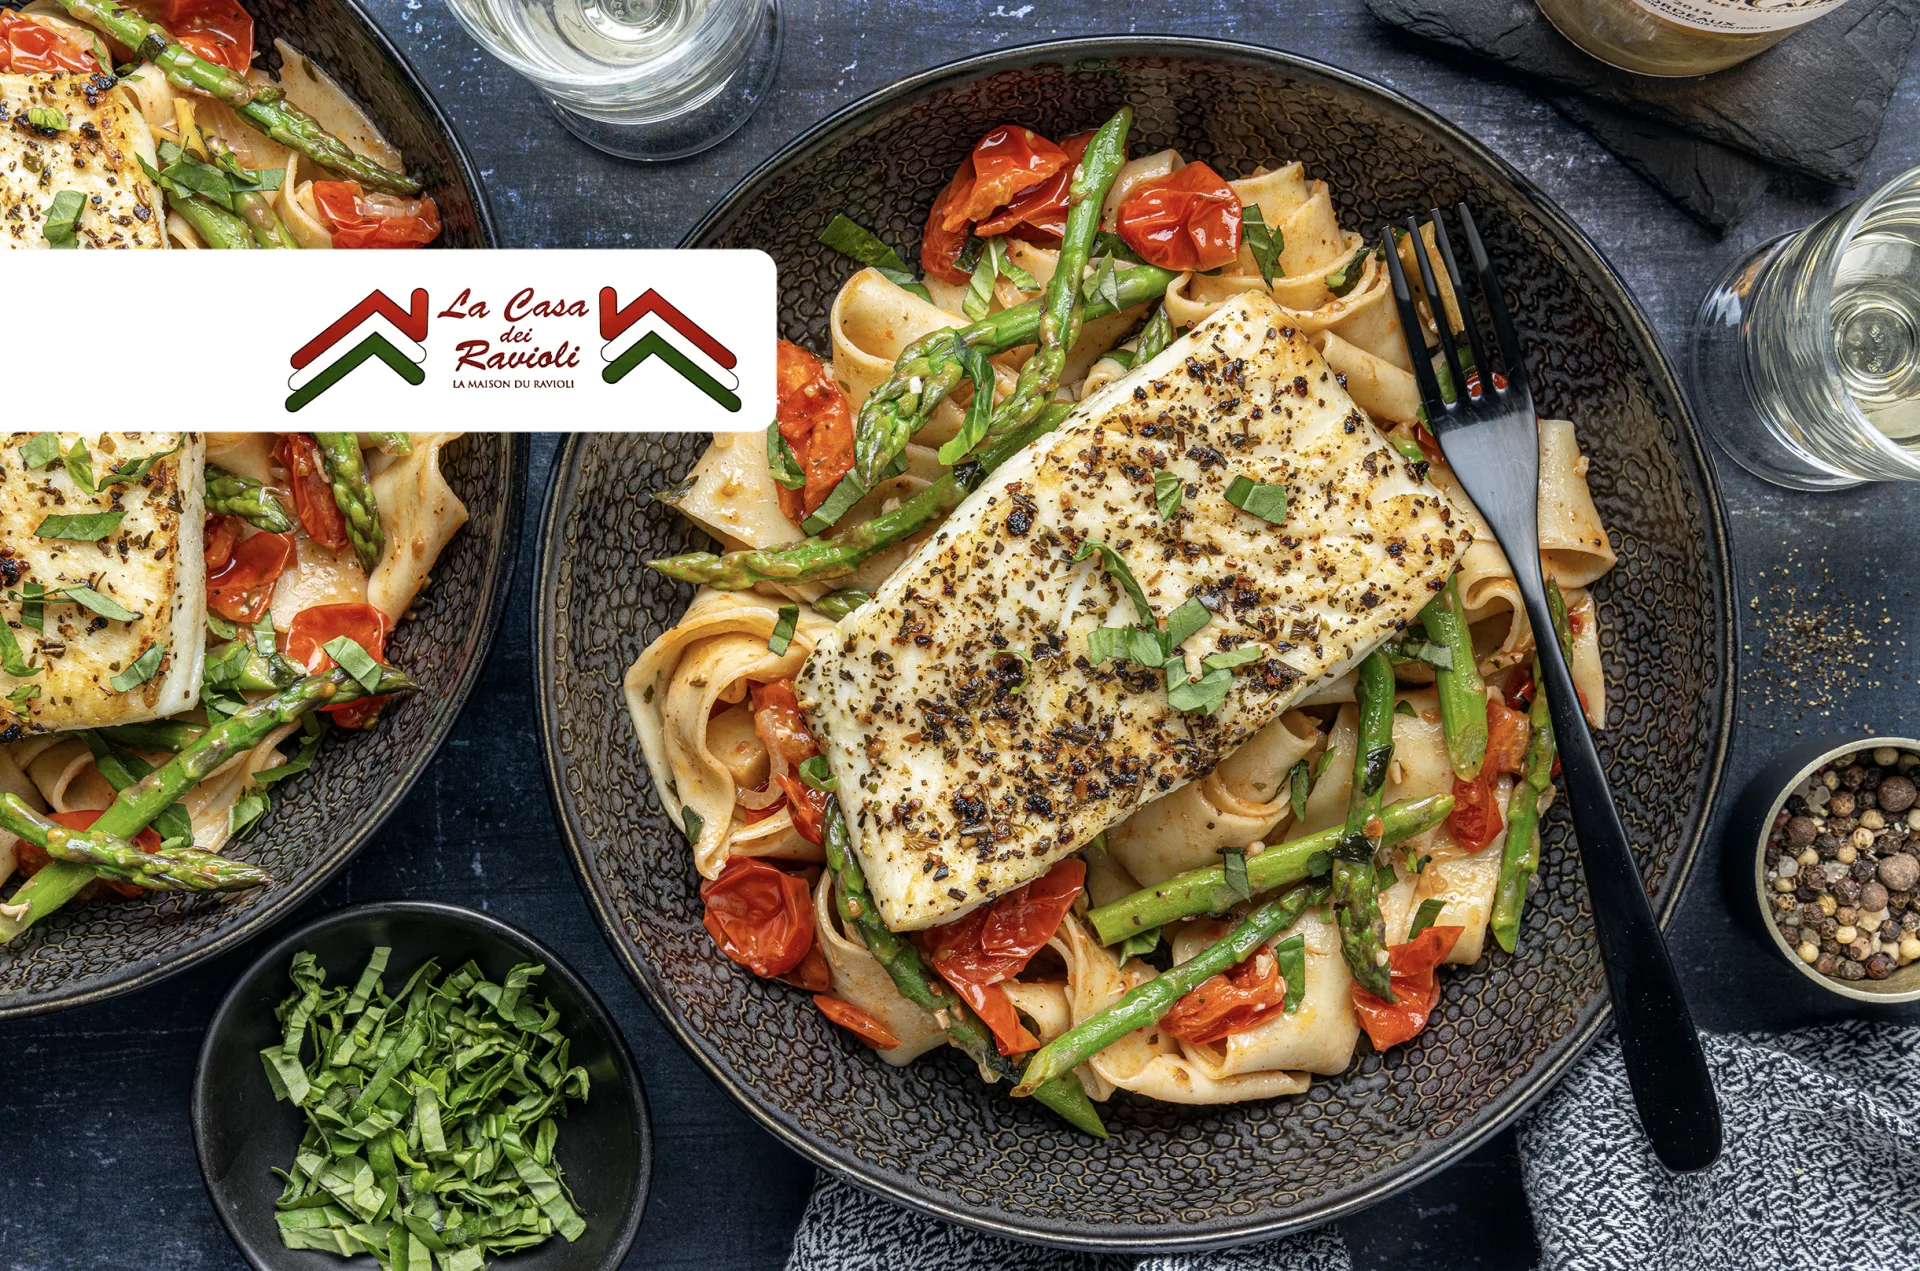 Tuscan Pan-Seared Pacific Halibut over Pappardelle Primavera with Tomato Butter & Asparagus